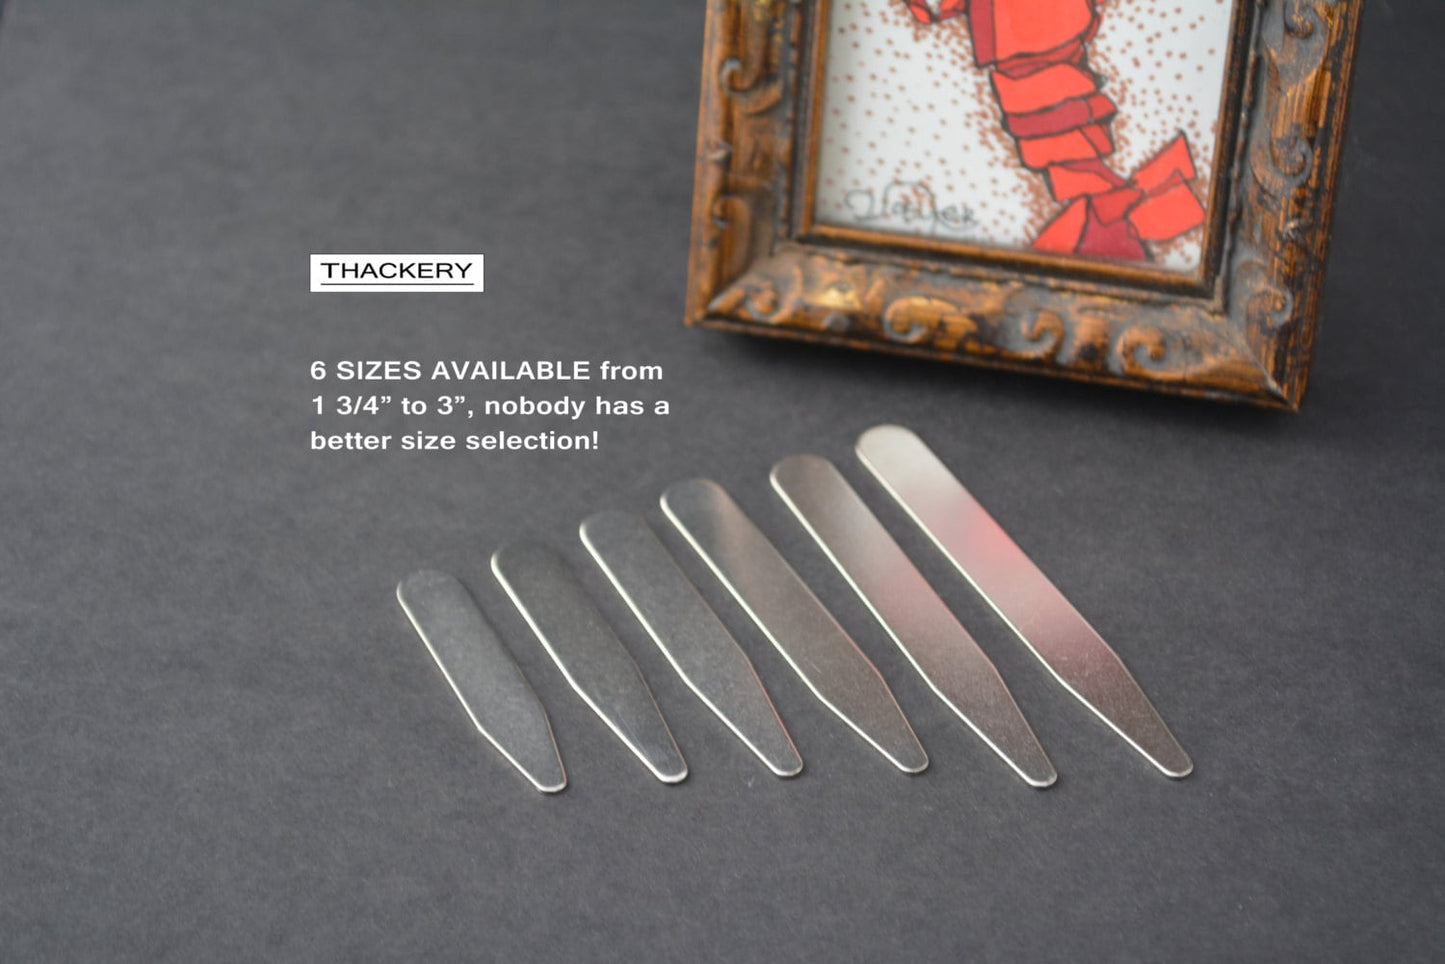 2 1/2" Stainless steel set of 5 COLLAR STAYS / TIPS (10 total) (2 1/2" = 63mm) long x 3/8" (9mm) wide